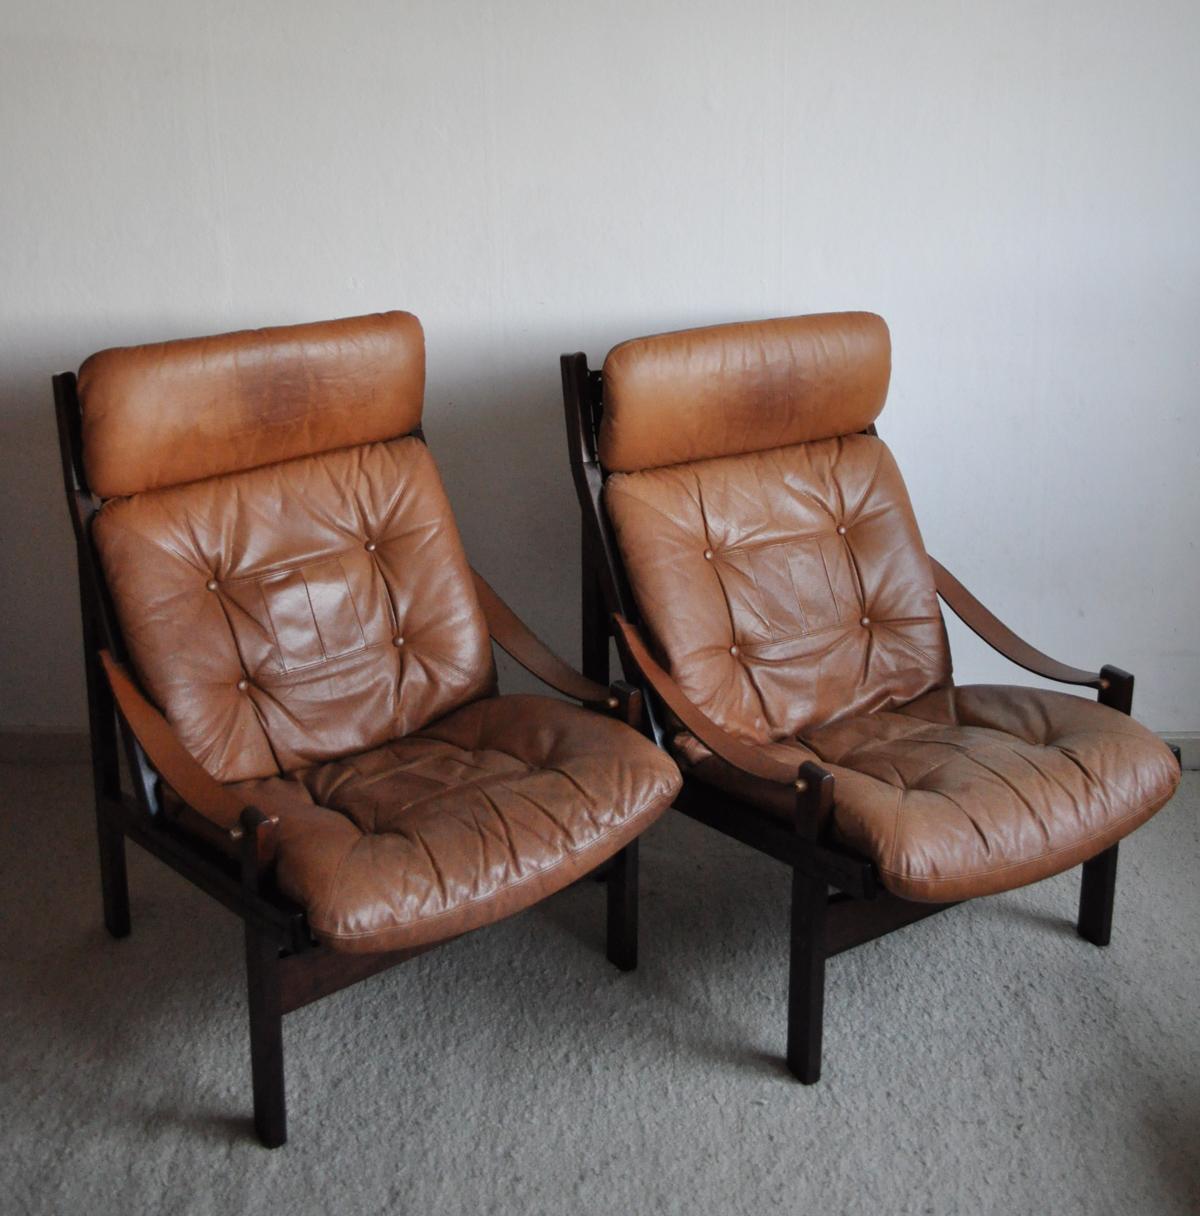 Hunter lounge chair with cognac brown leather and stained hardwood frame. Canvas weave holding the leather cushion up.
Designed in the 1960s by Norwegian Torbjørn Afdal for Bruksbo.
Good vintage condition. Patinated with signs of wear consistent